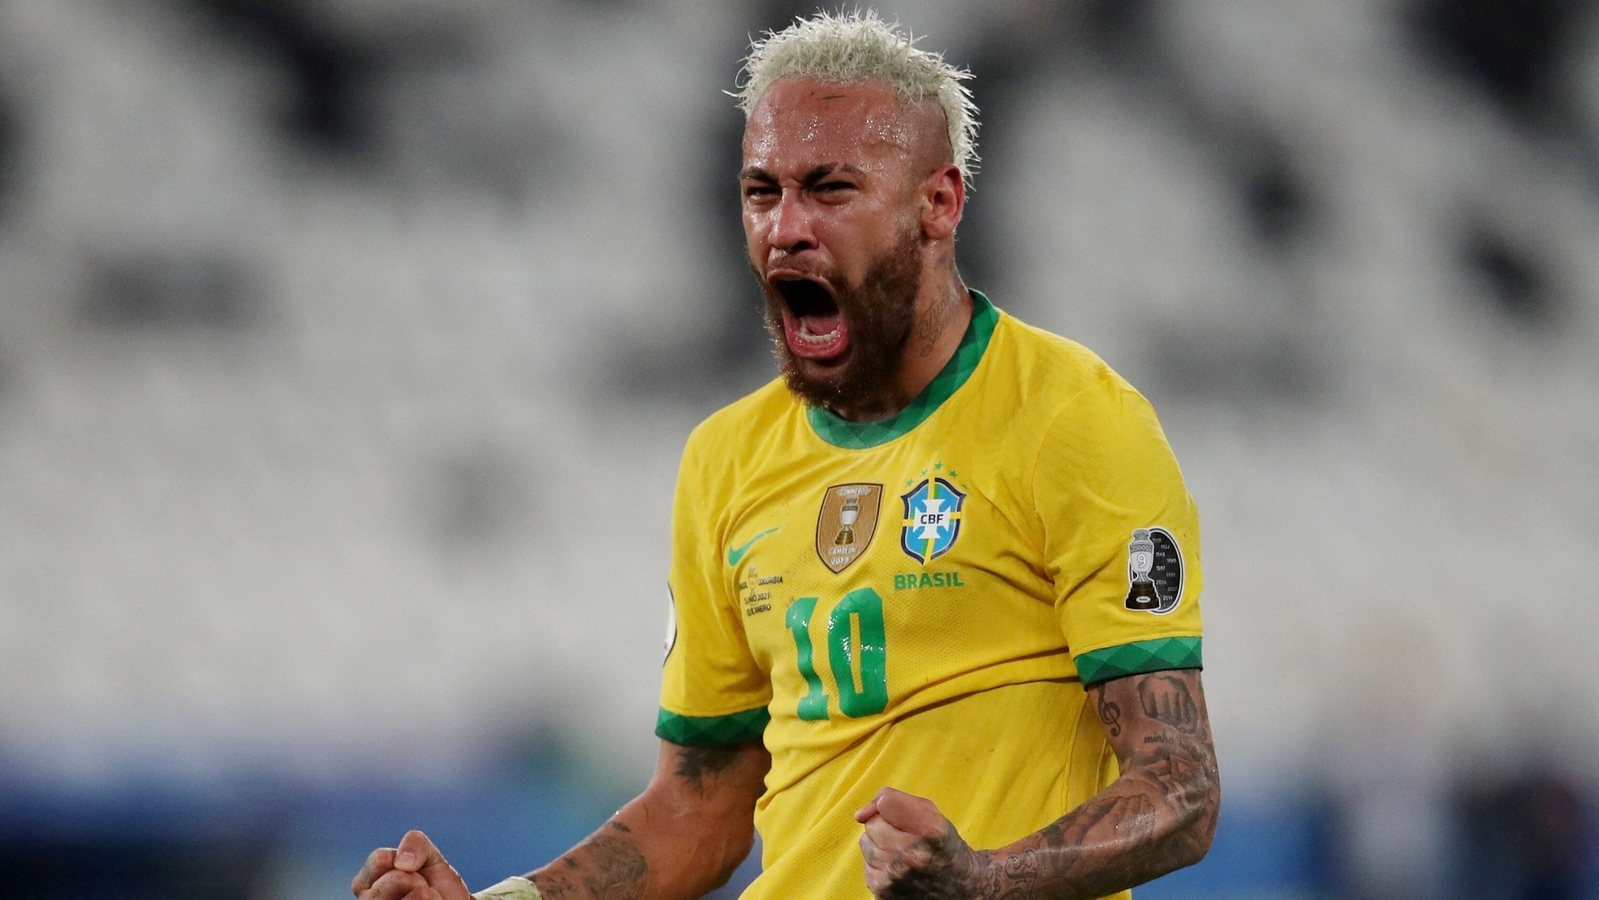 Breaking down Brazil's World Cup squad: From Neymar to Thiago